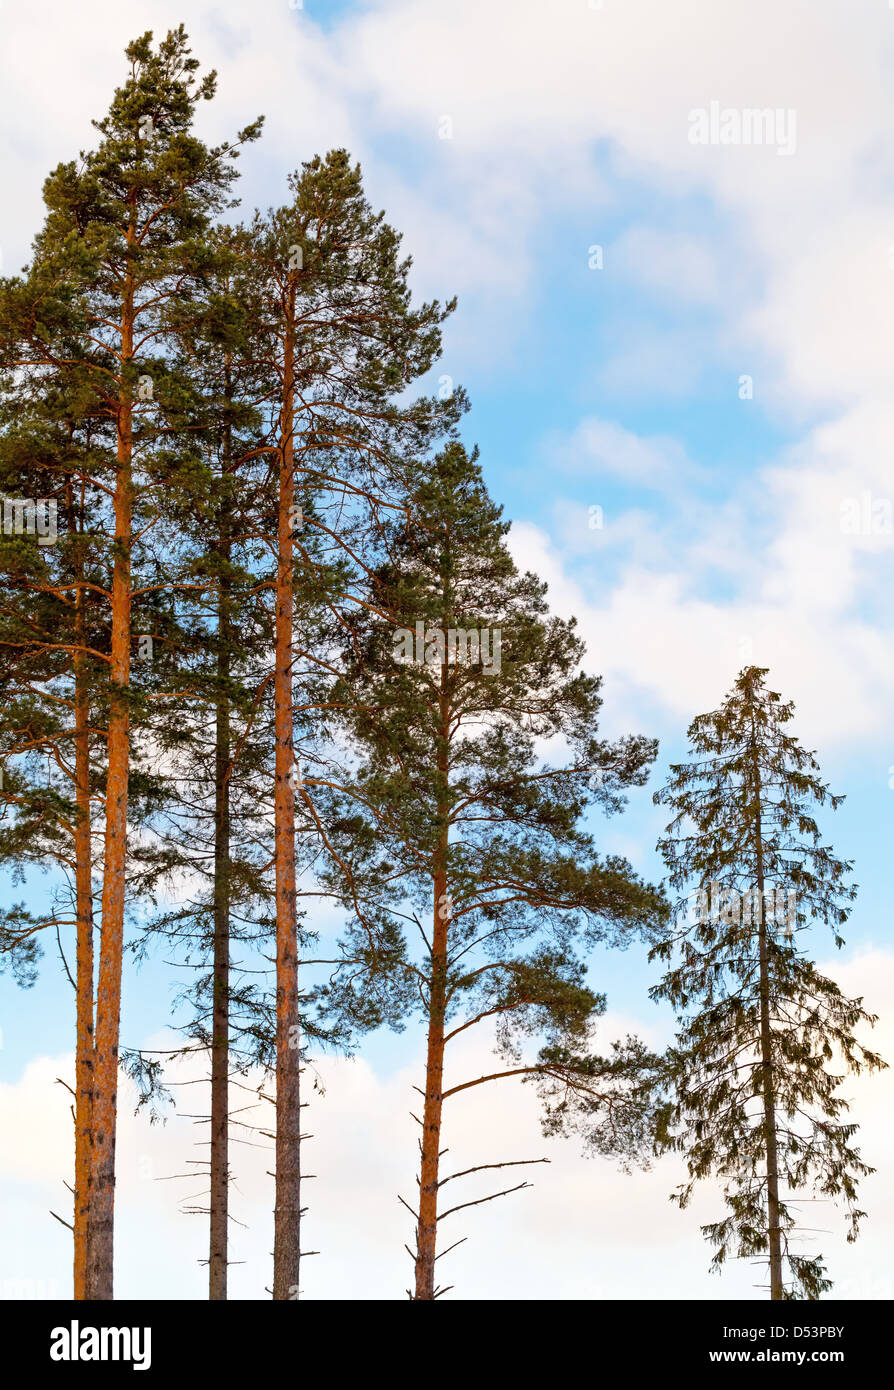 Pine trees and fir in the forest above cloudy sky Stock Photo